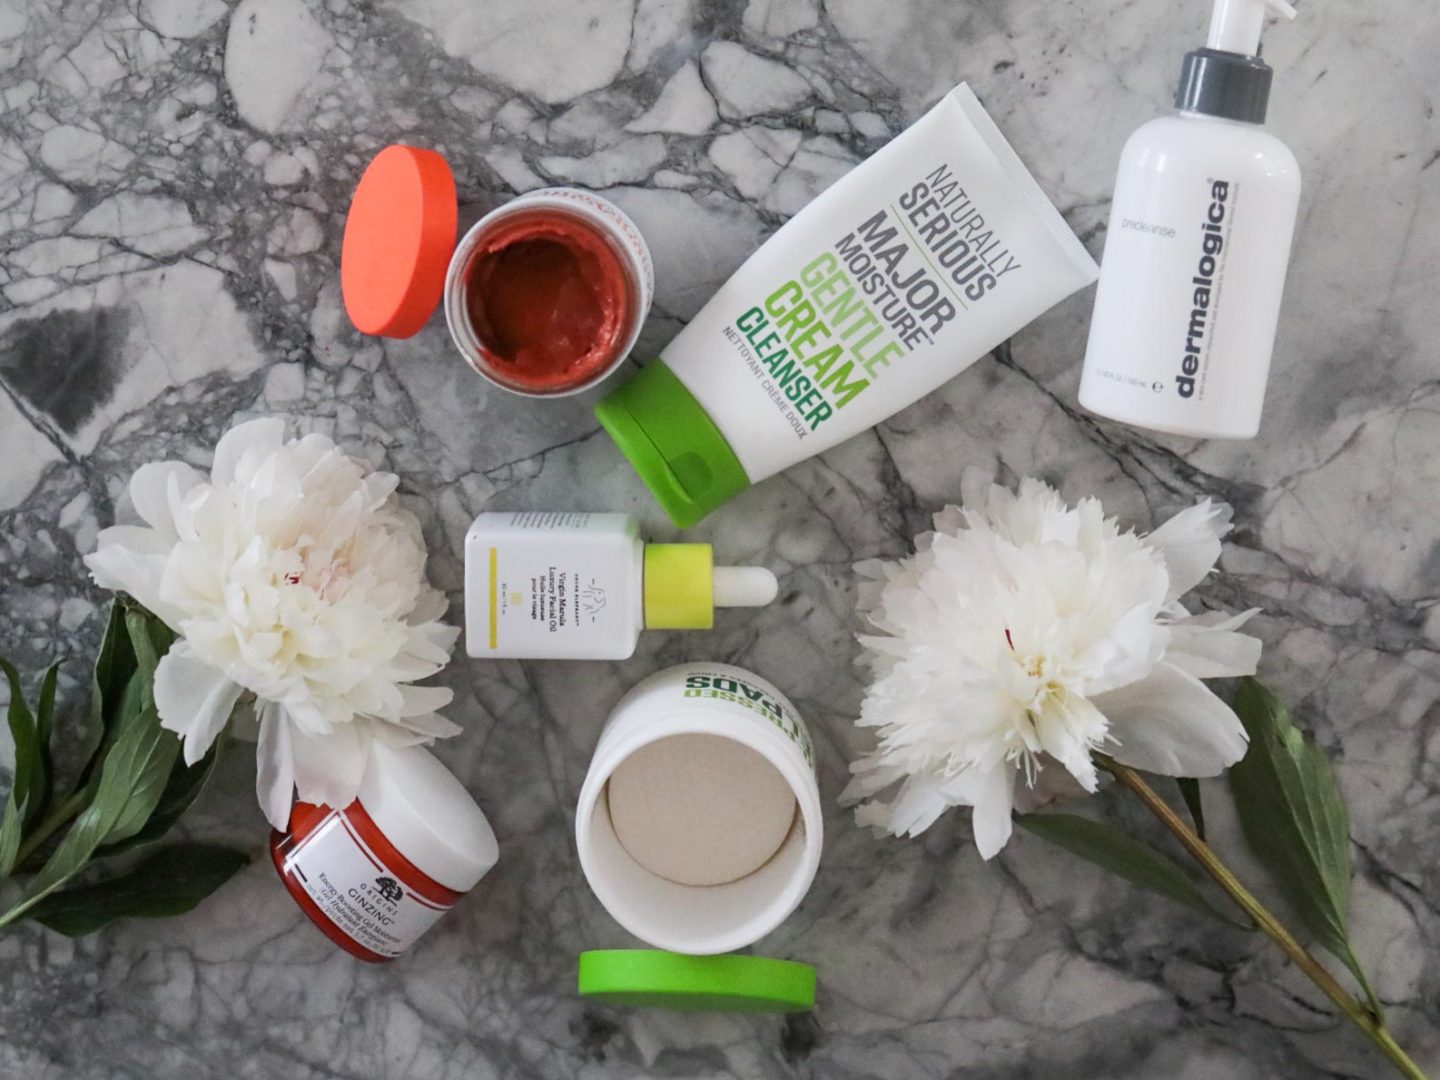 6 skincare revival product picks, featuring Naturally Serious Major Moisture Gentle Cream Cleanser, Drunk Elephant Virgin Marula Oil, Dermalogica Precleanse, Origins Ginzing, Naturally Serious Cold Pressed Peel Pads, Naturally Serious Fruit-tox